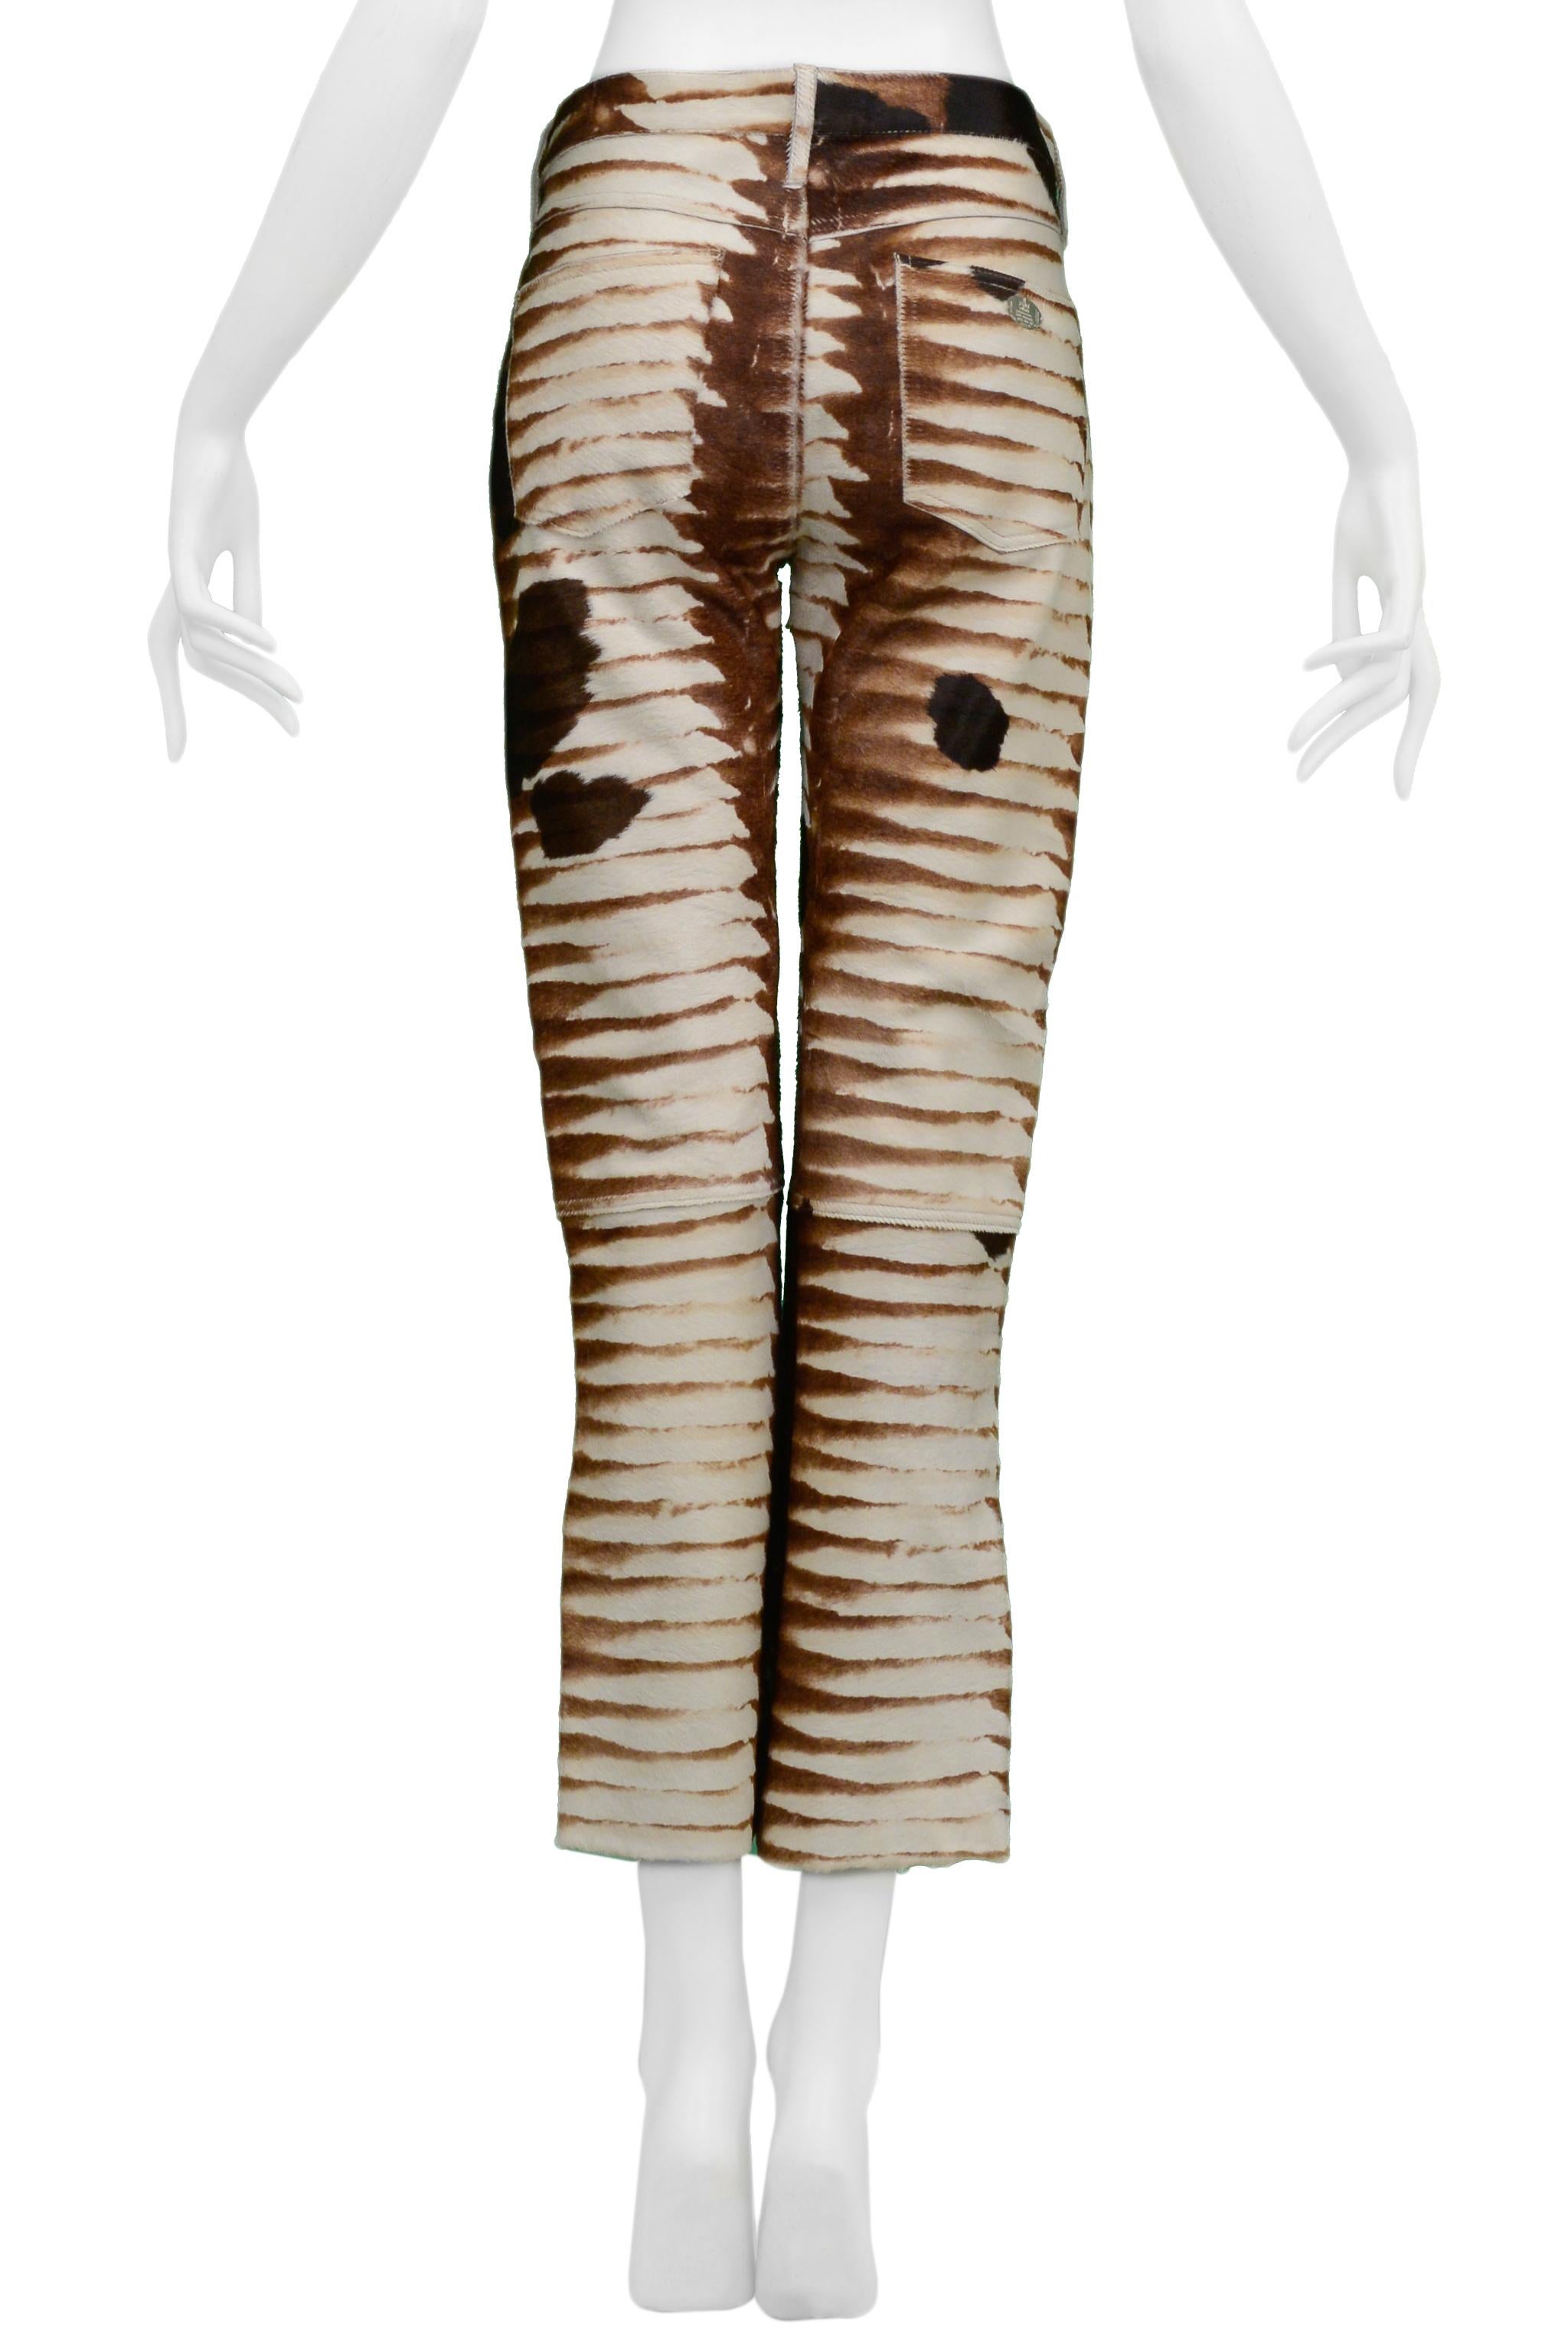 Resurrection Vintage is excited to offer a pair of vintage Fendi animal print pants featuring a classic 5-pocket jean silhouette, tapered legs, and silver-tone hardware.  

Fendi
Size 40
Pony Hair
Excellent Vintage Condition
Authenticity Guaranteed 